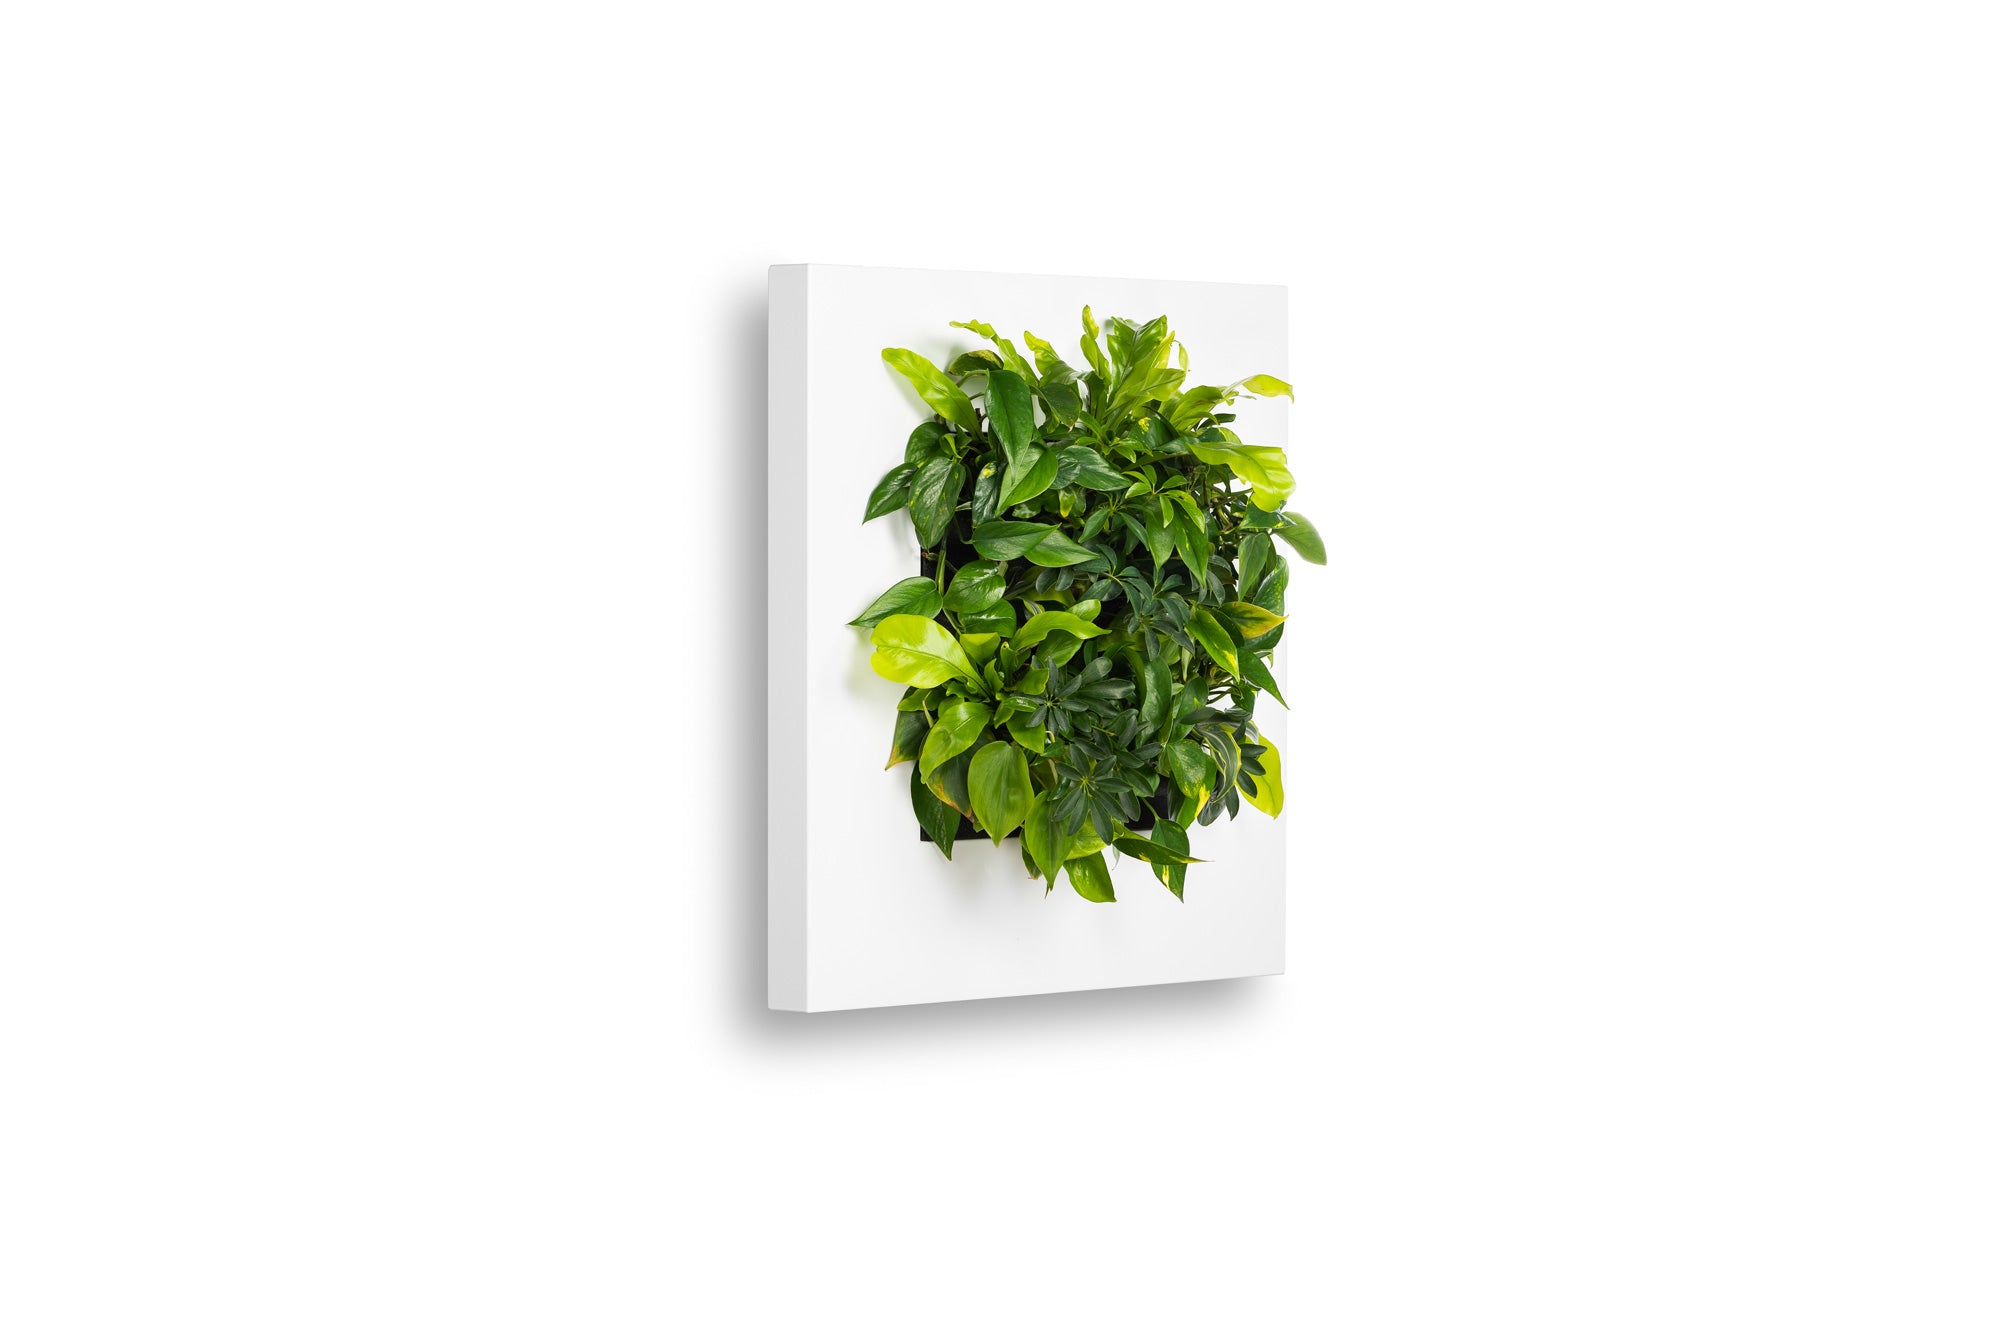 LIVE PICTURE - Living wall frame - 72cm - White